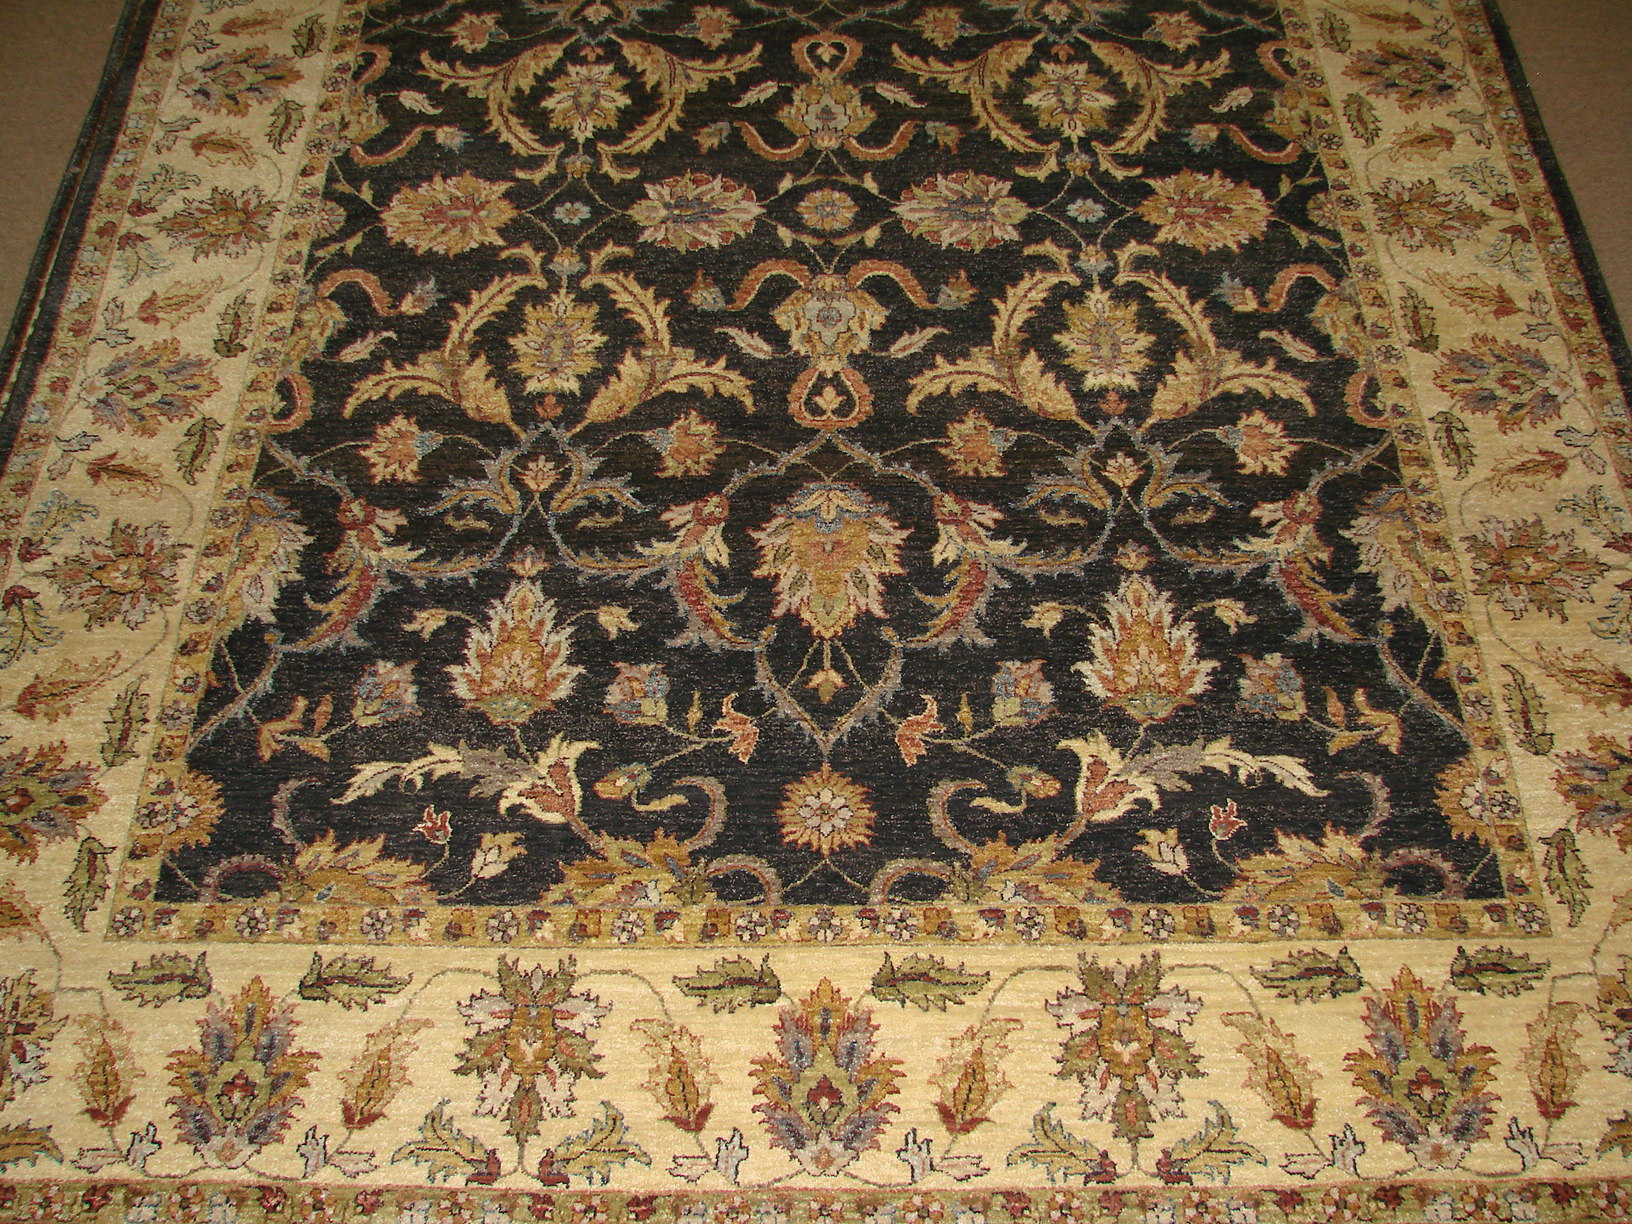 Clearance & Discount Rugs A-31 Vase Sultan 02860 Black - Charcoal & Lt. Gold - Gold Hand Knotted Rug